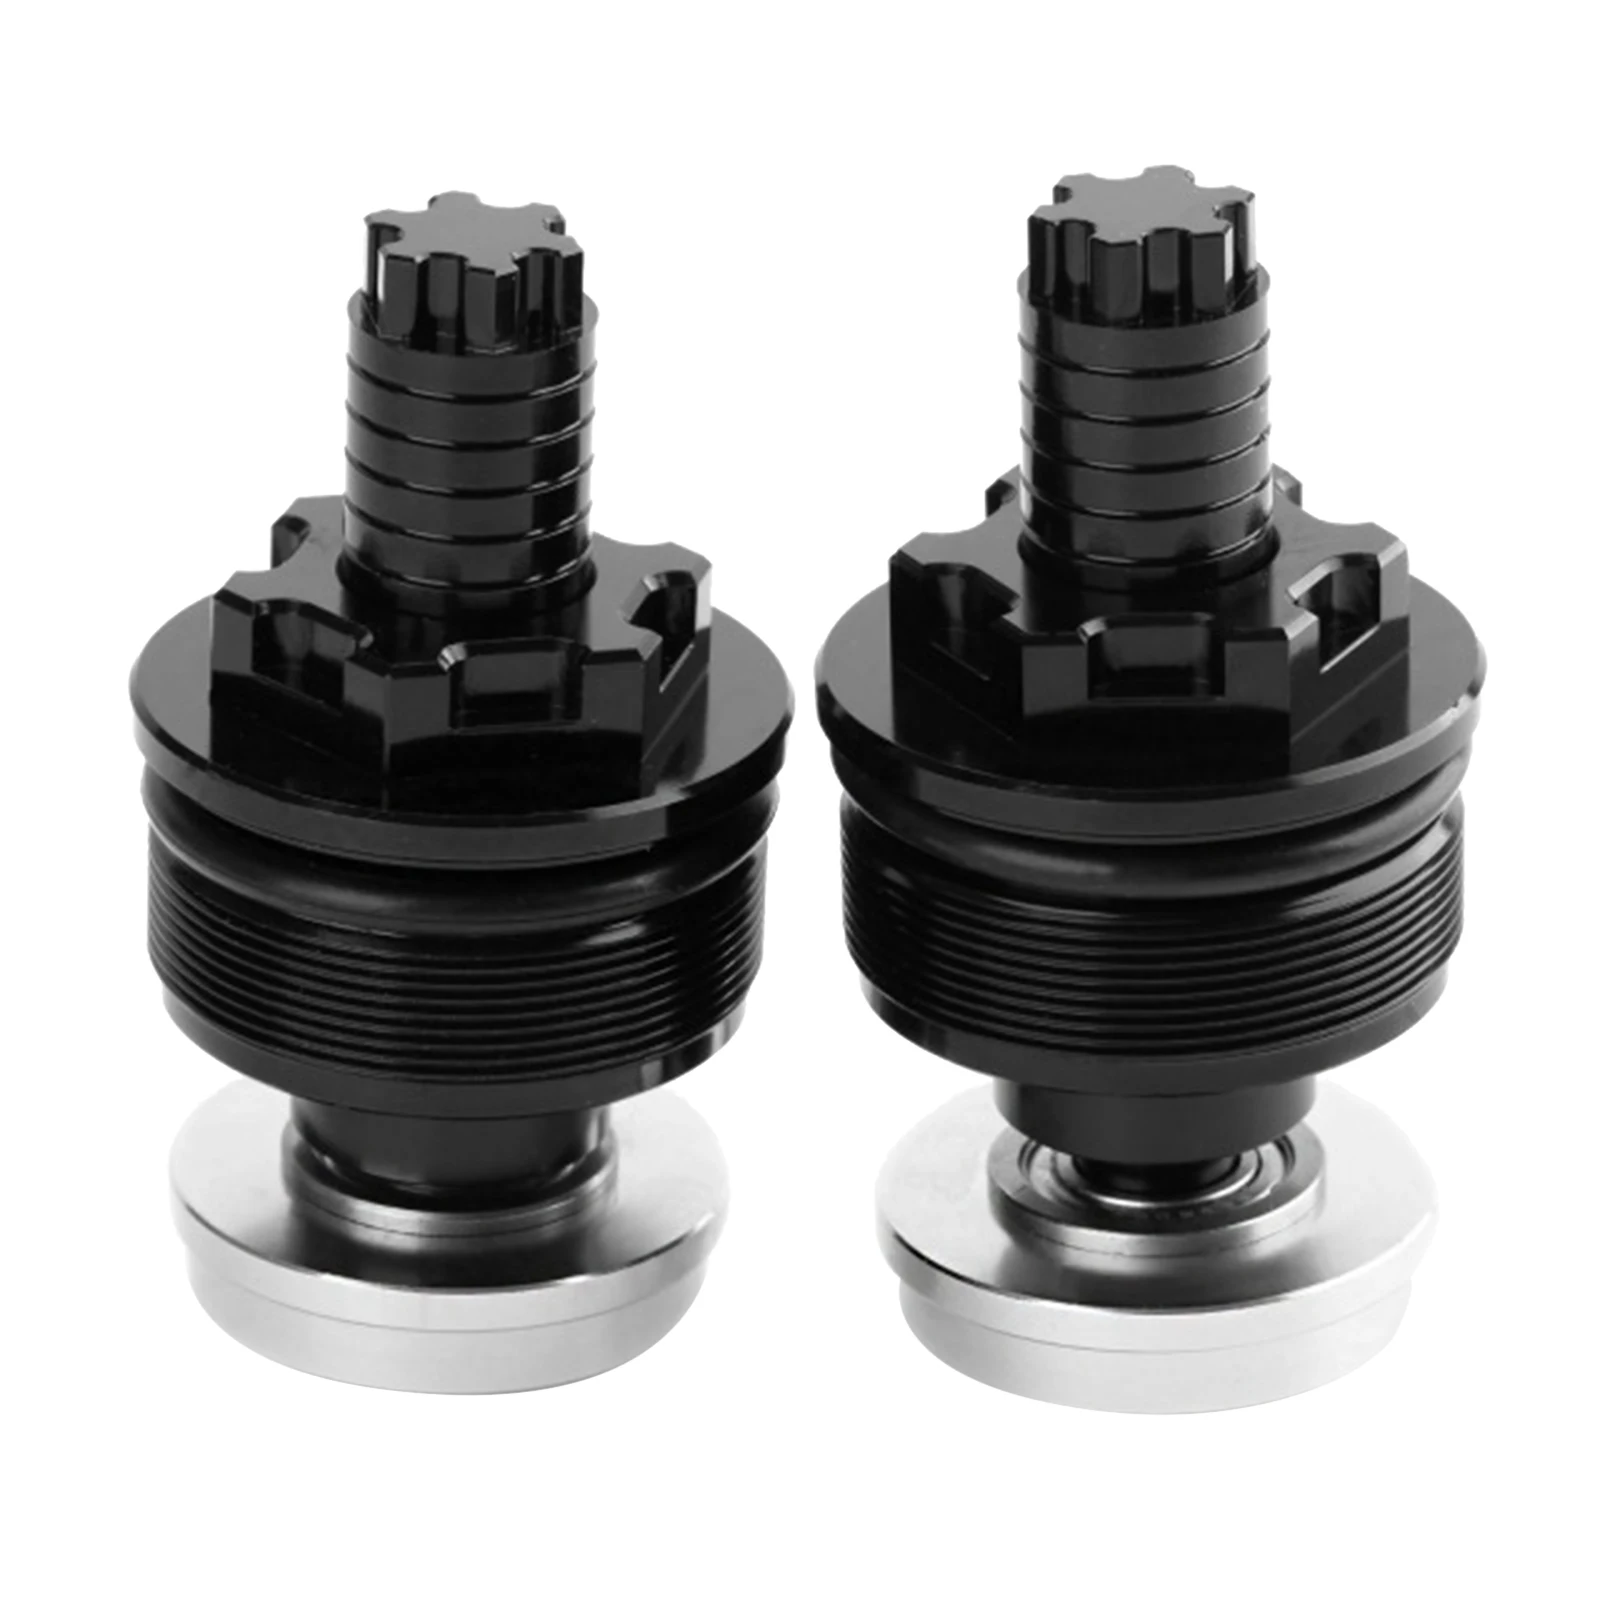 

2pcs Aluminum Alloy Front Shock-Absorber Adjustment Compatible for Yamaha YZF R3 R25 Great Accessories